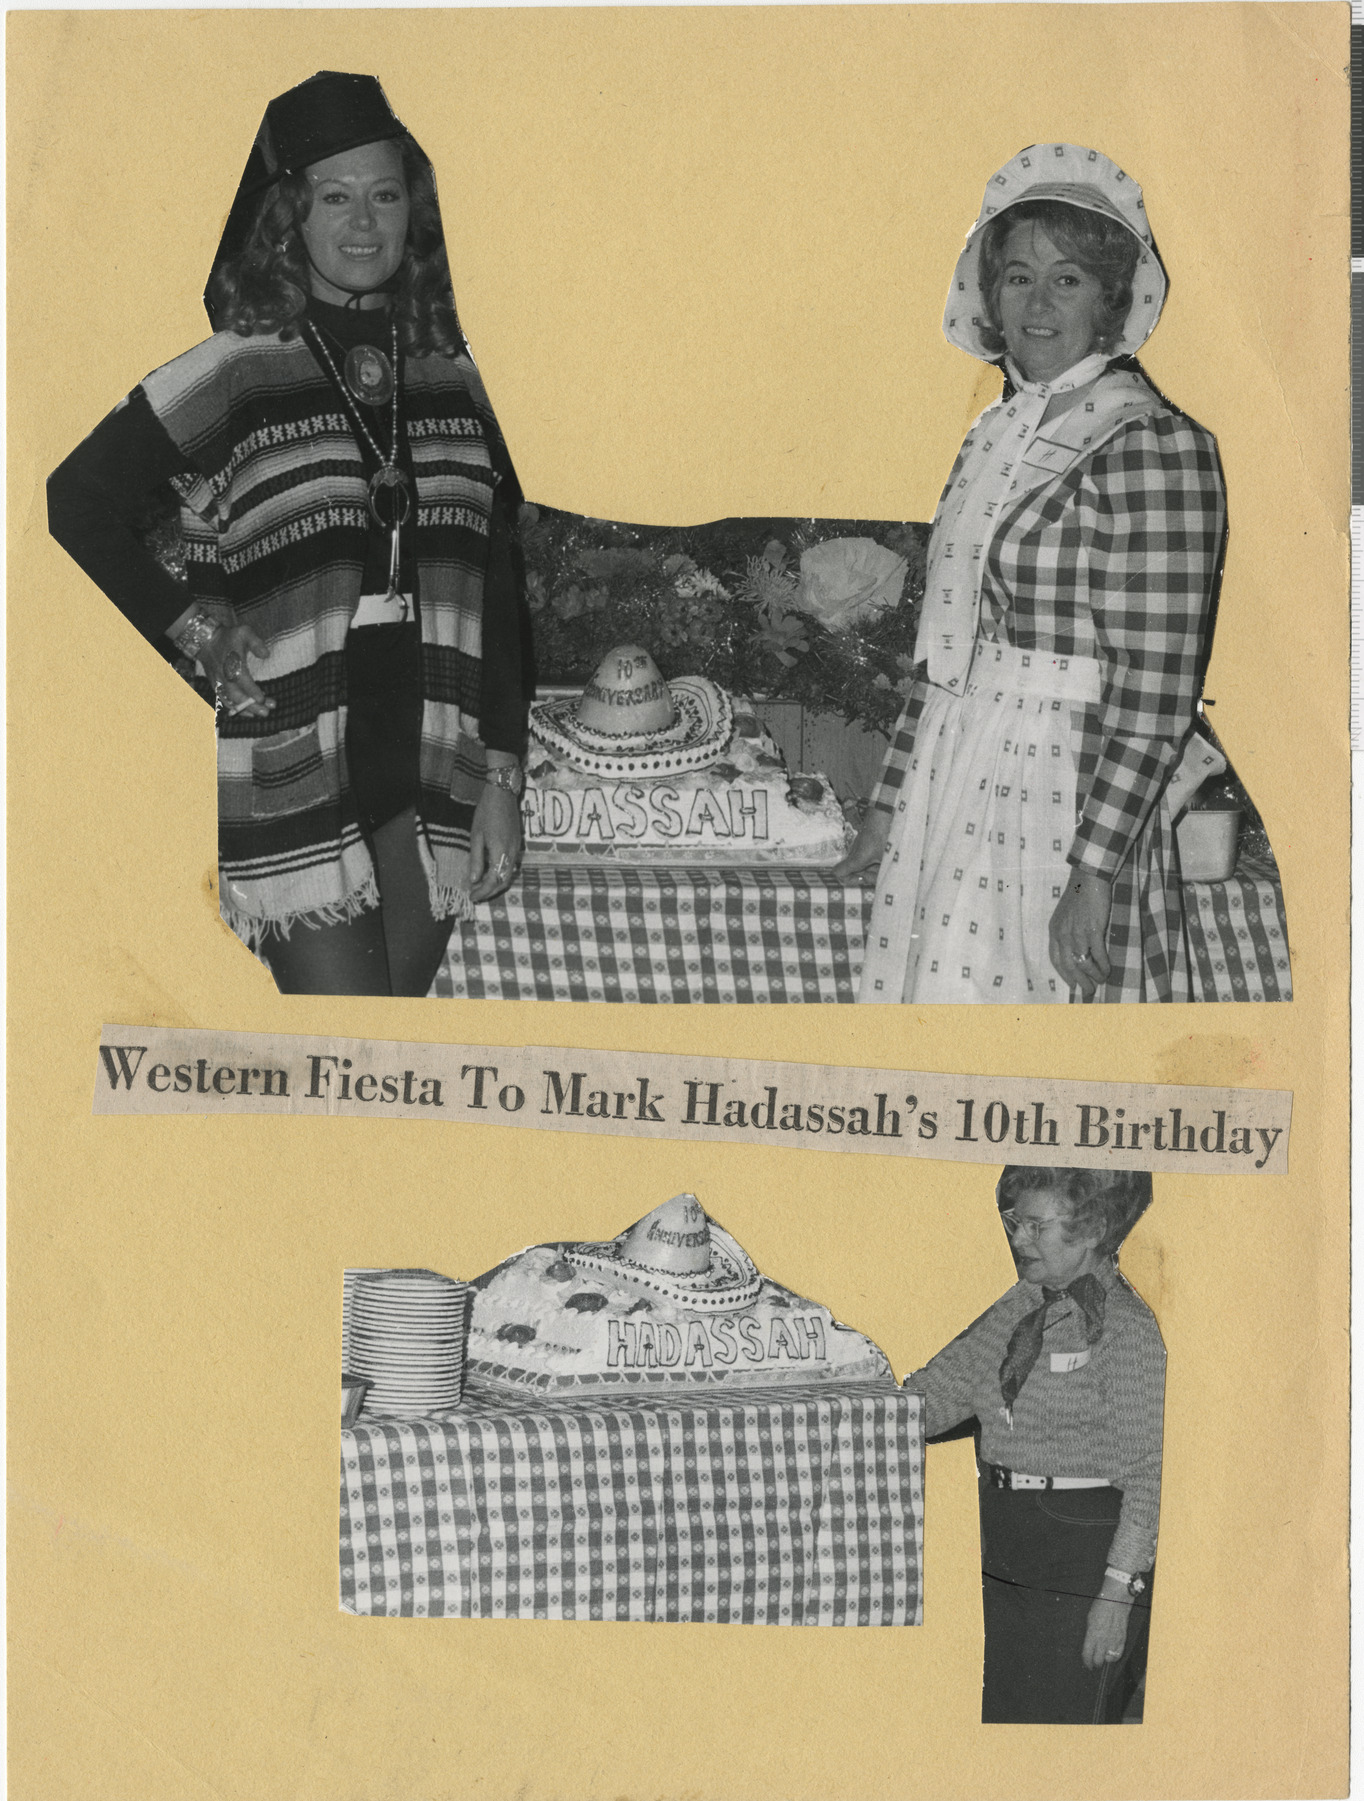 Photographs of Hadassah members at annual birthday party with cake, and newspaper clipping, Western Fiesta to Mark Hadassah's 10th Birthday, publication and date unknown